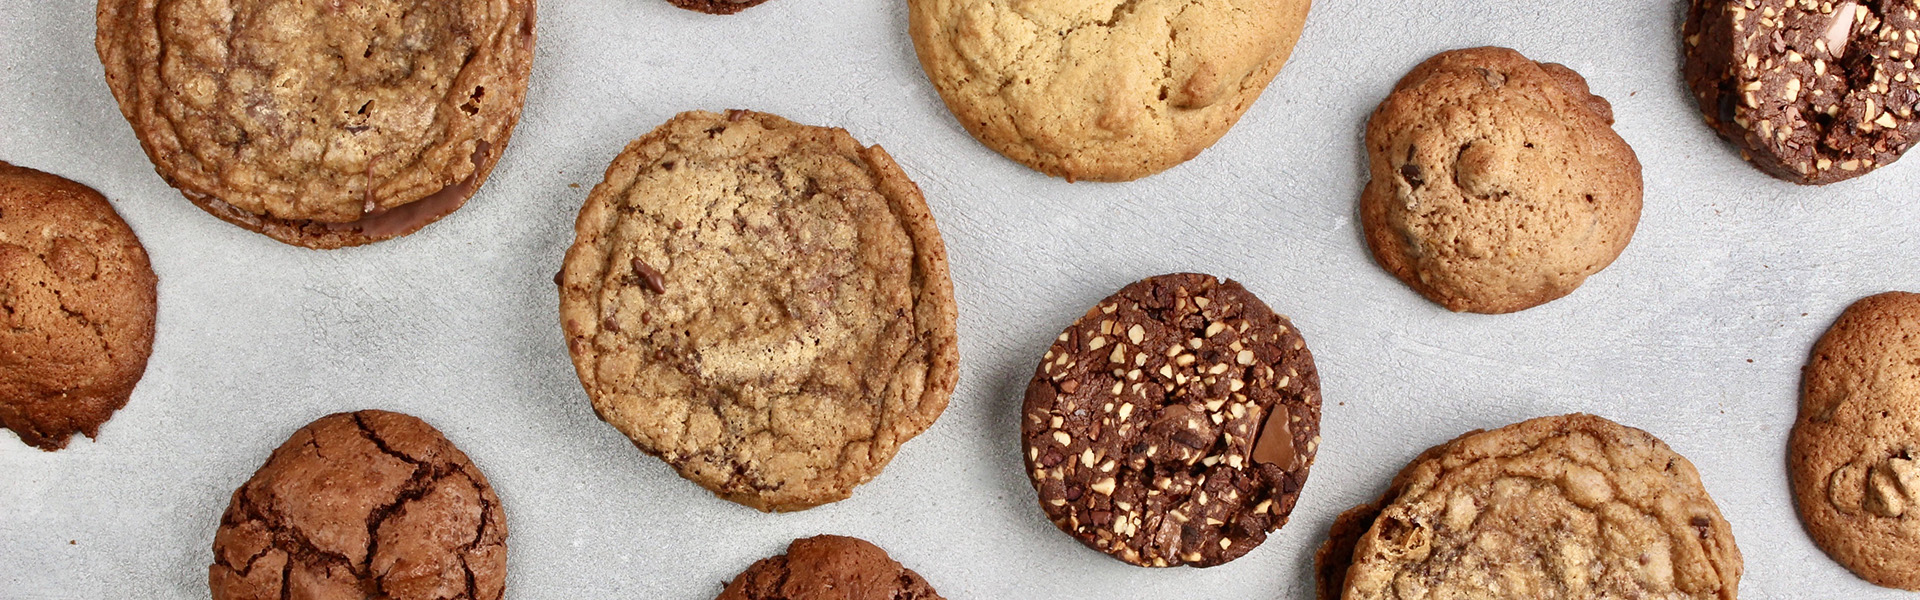 Cookie recipes from 5 top chefs using Guittard Chocolate Chips